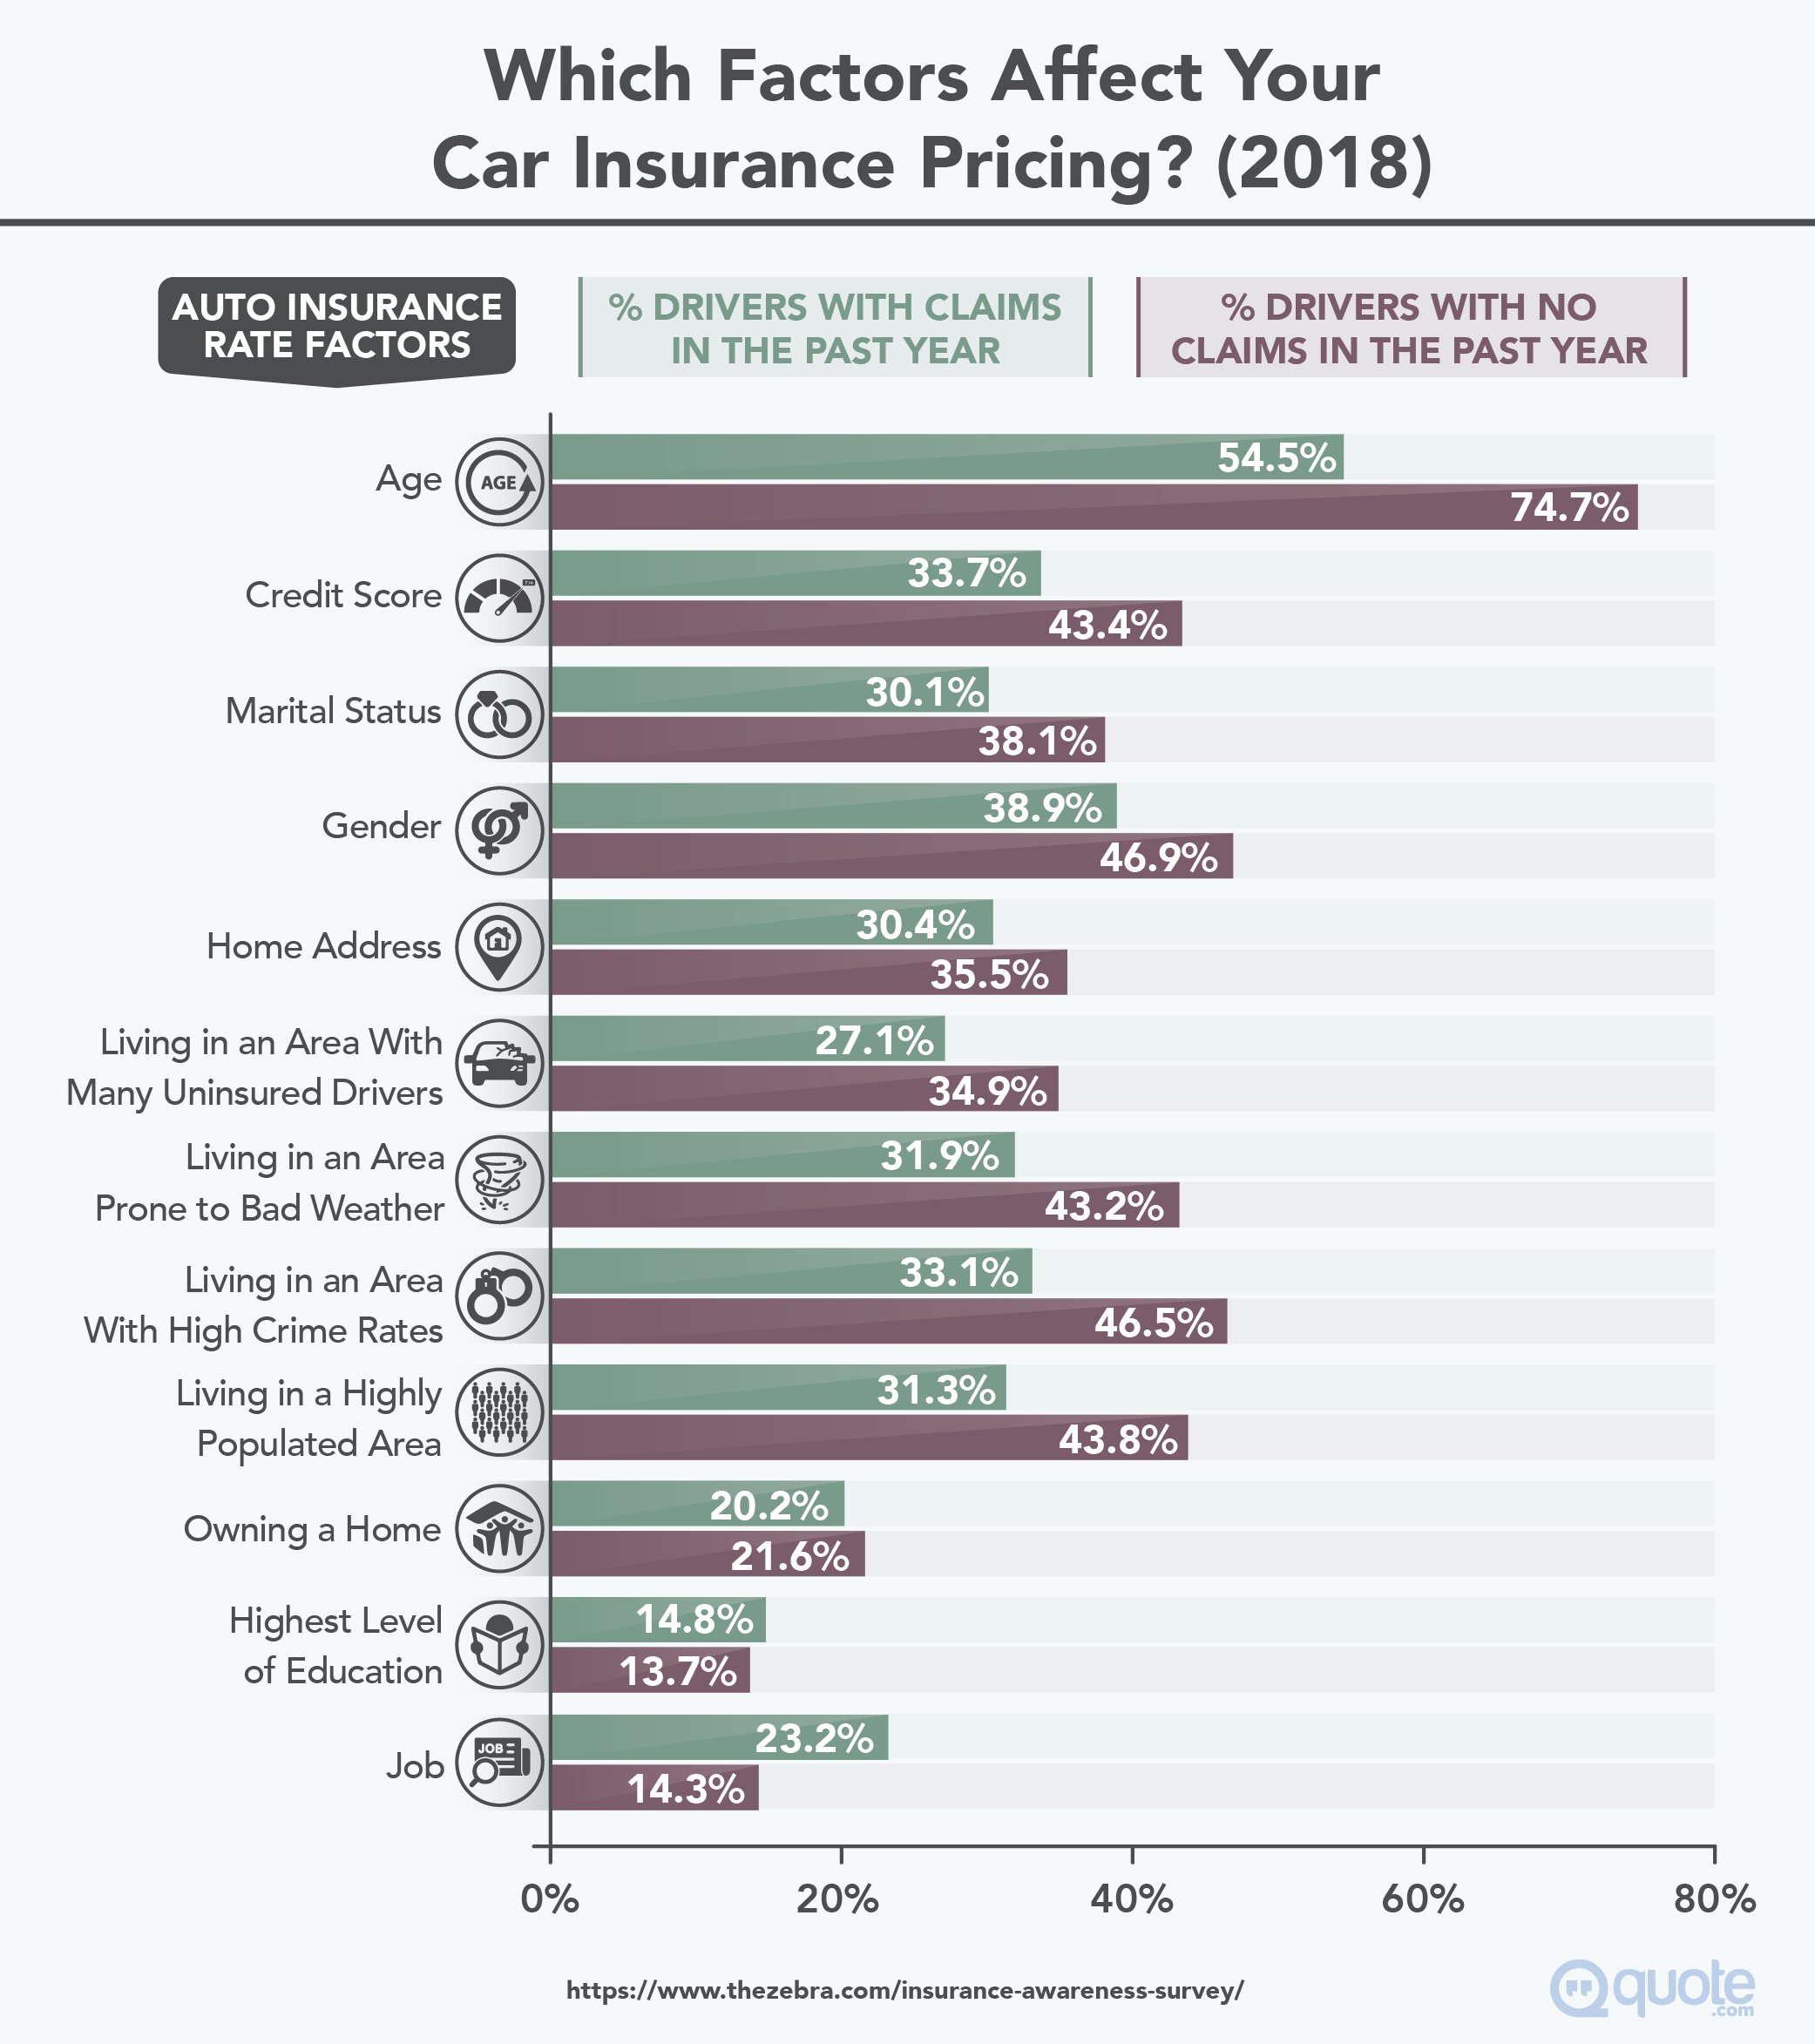 Survey: Which Factors Affect Your Car Insurance Pricing?